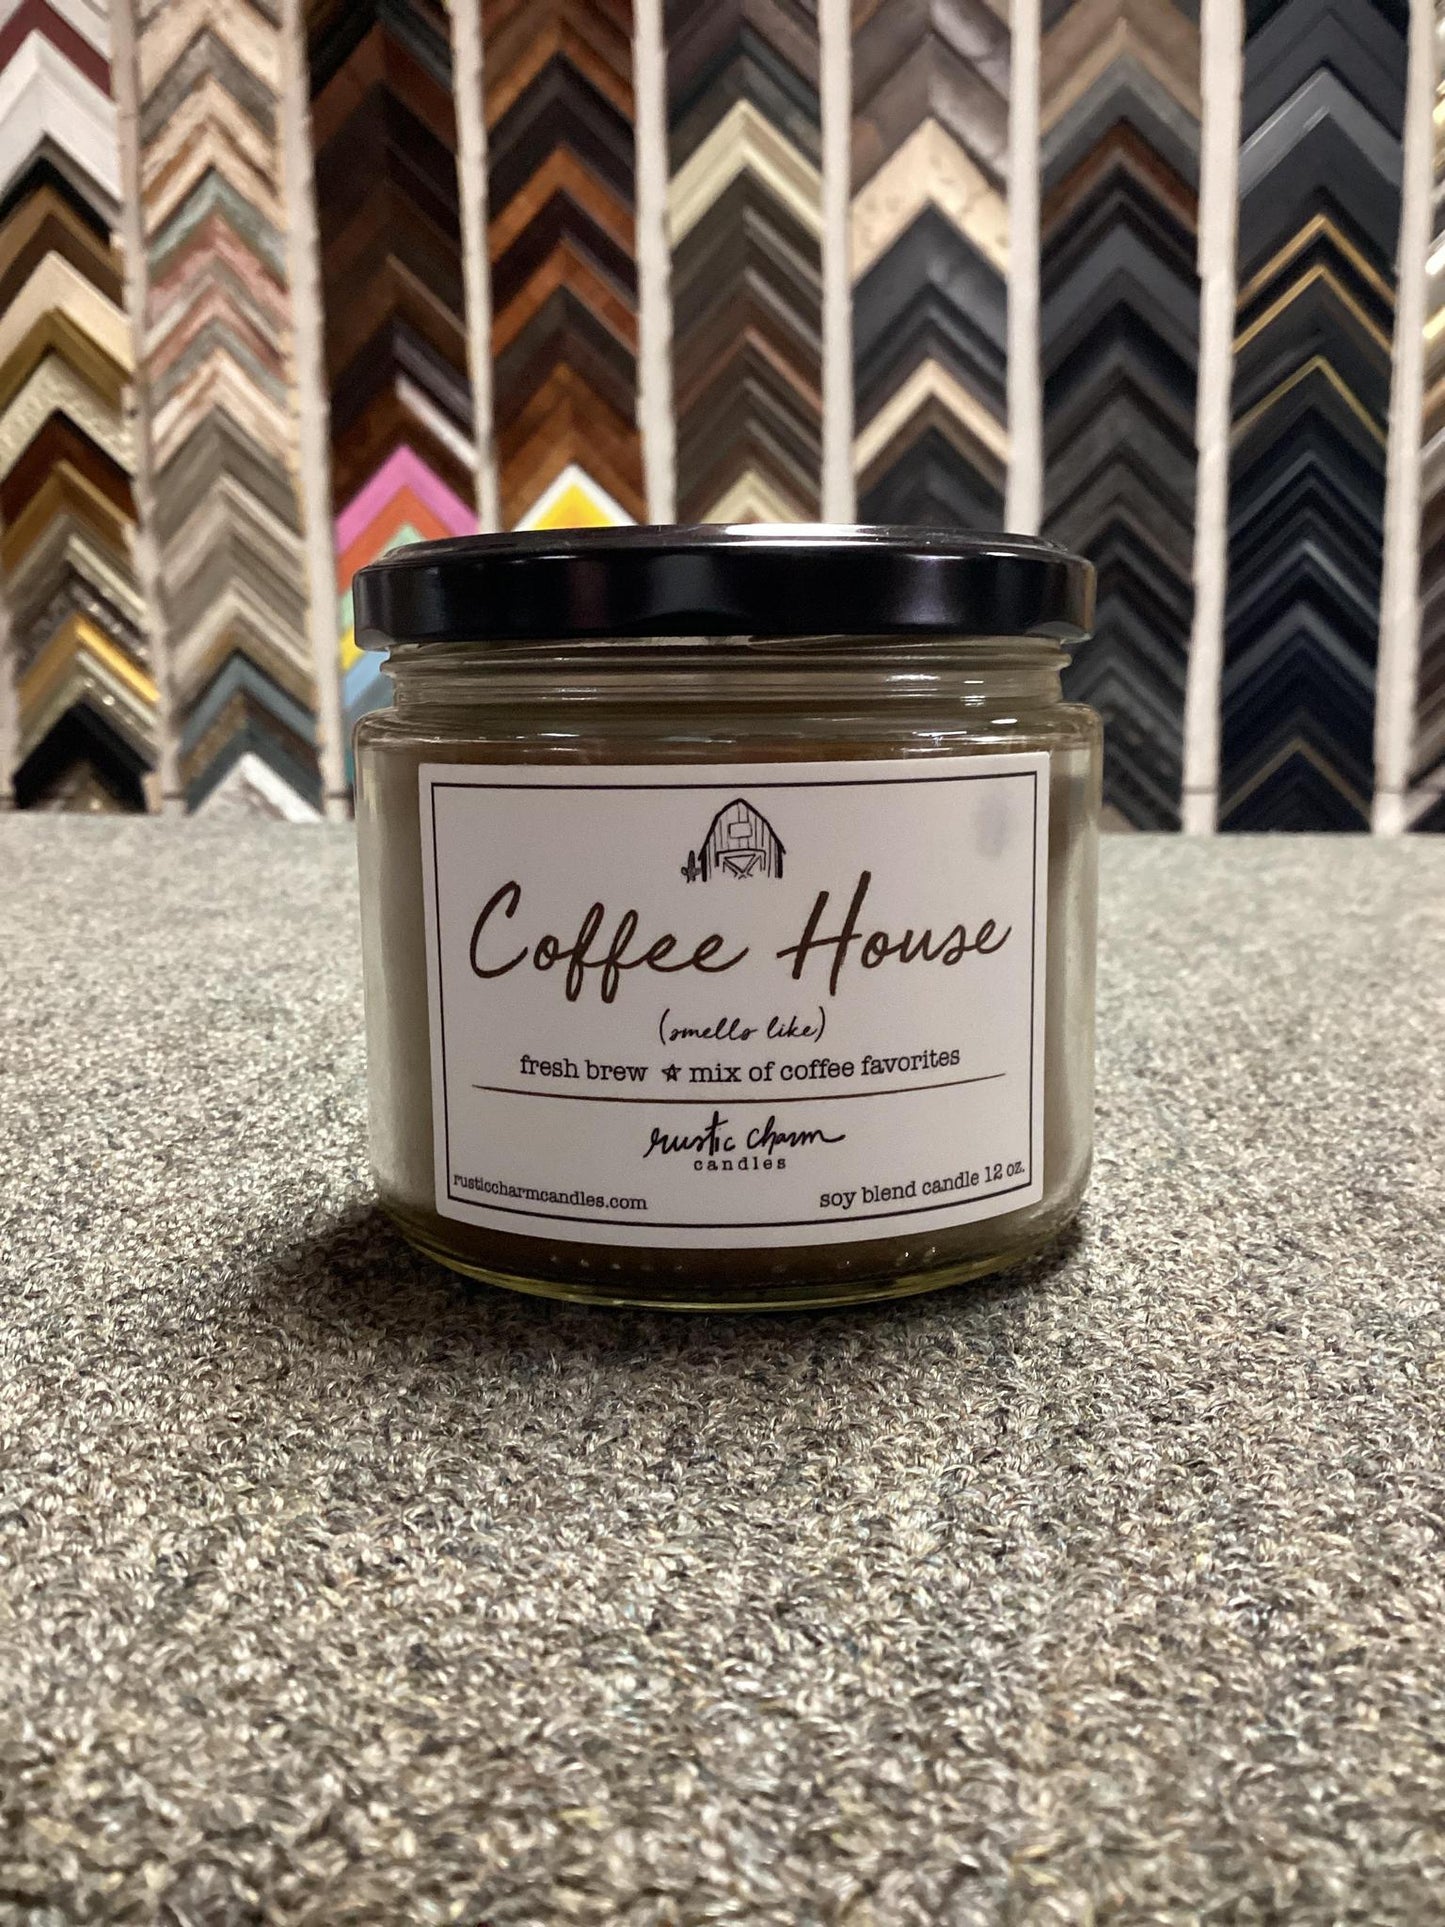 "Coffee House" Candle -Rustic Charm